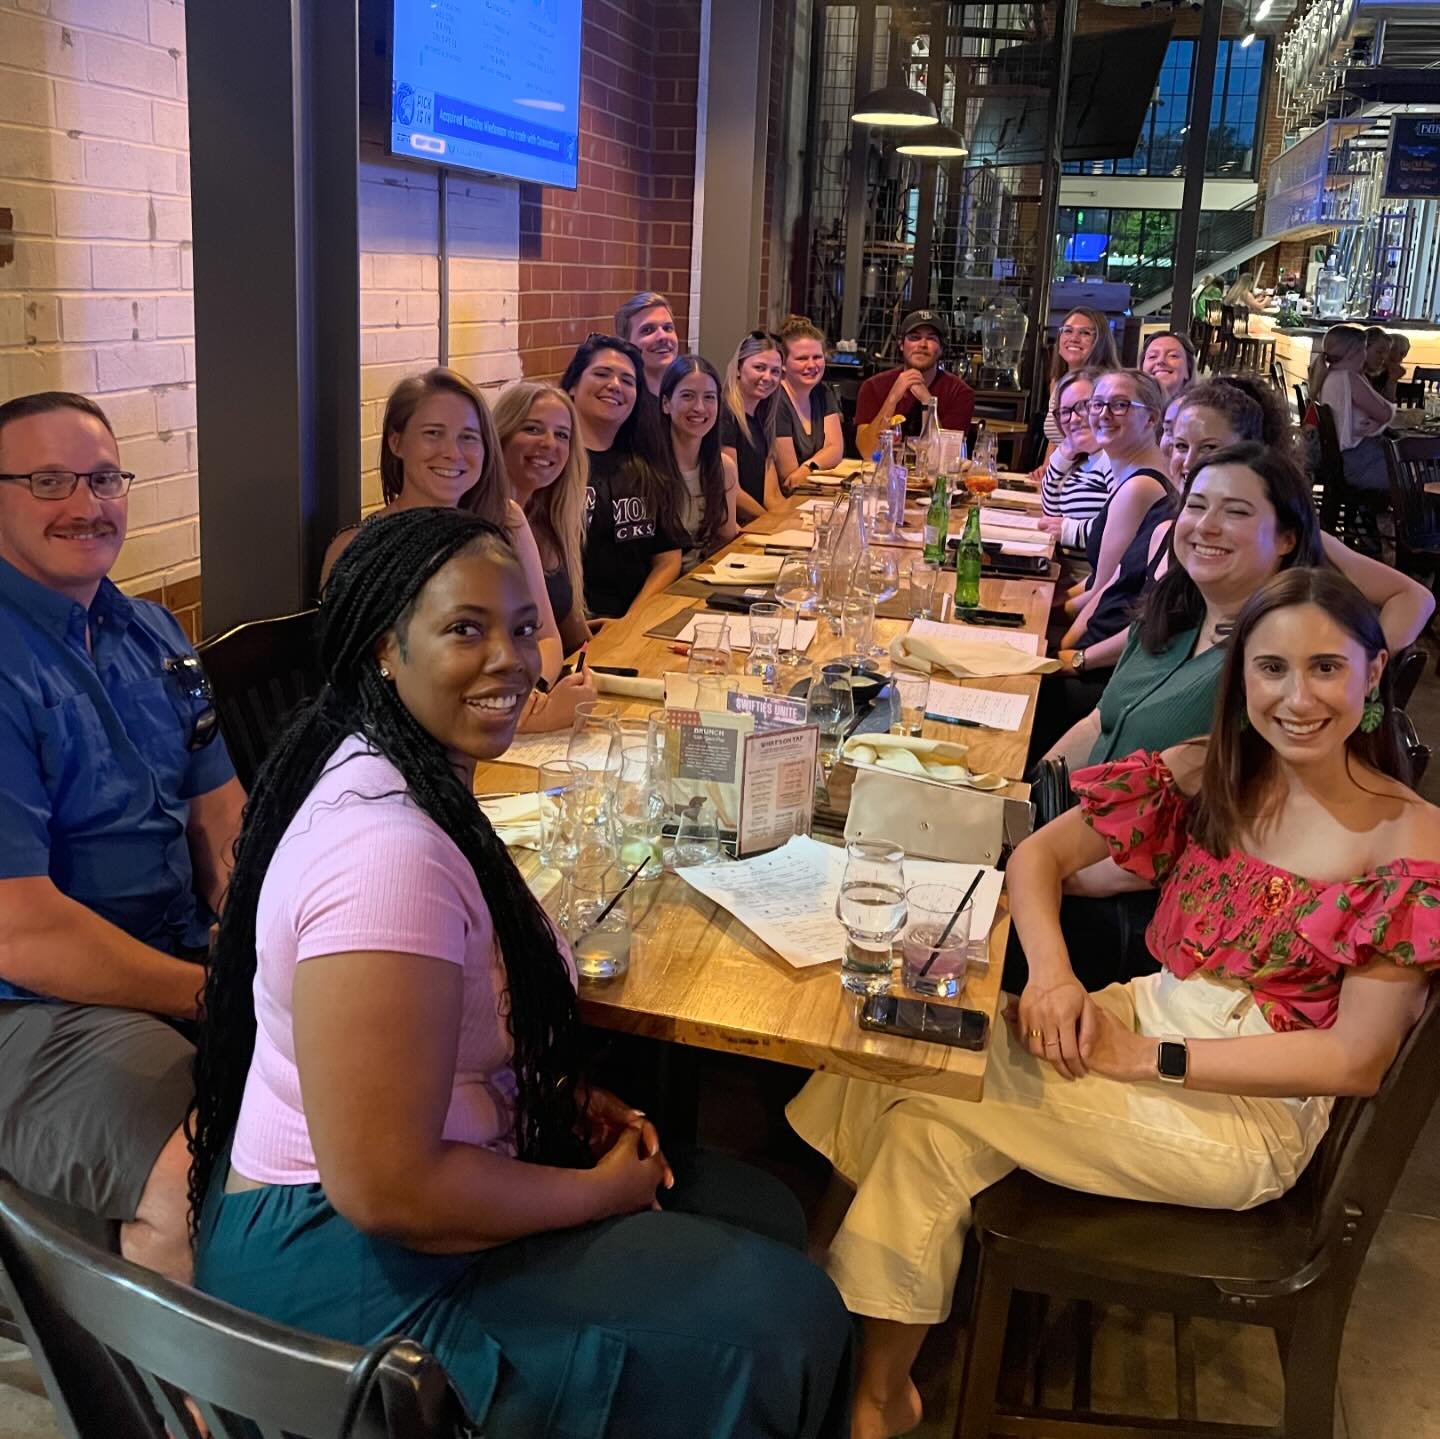 Thank you to everyone who came out for our monthly Chapter get-together this week!

We met at @trolleybarnclt for food, drinks, and trivia (we thought). Turns out we&rsquo;d met up for music bingo! Our table had a great time trying to name the songs 